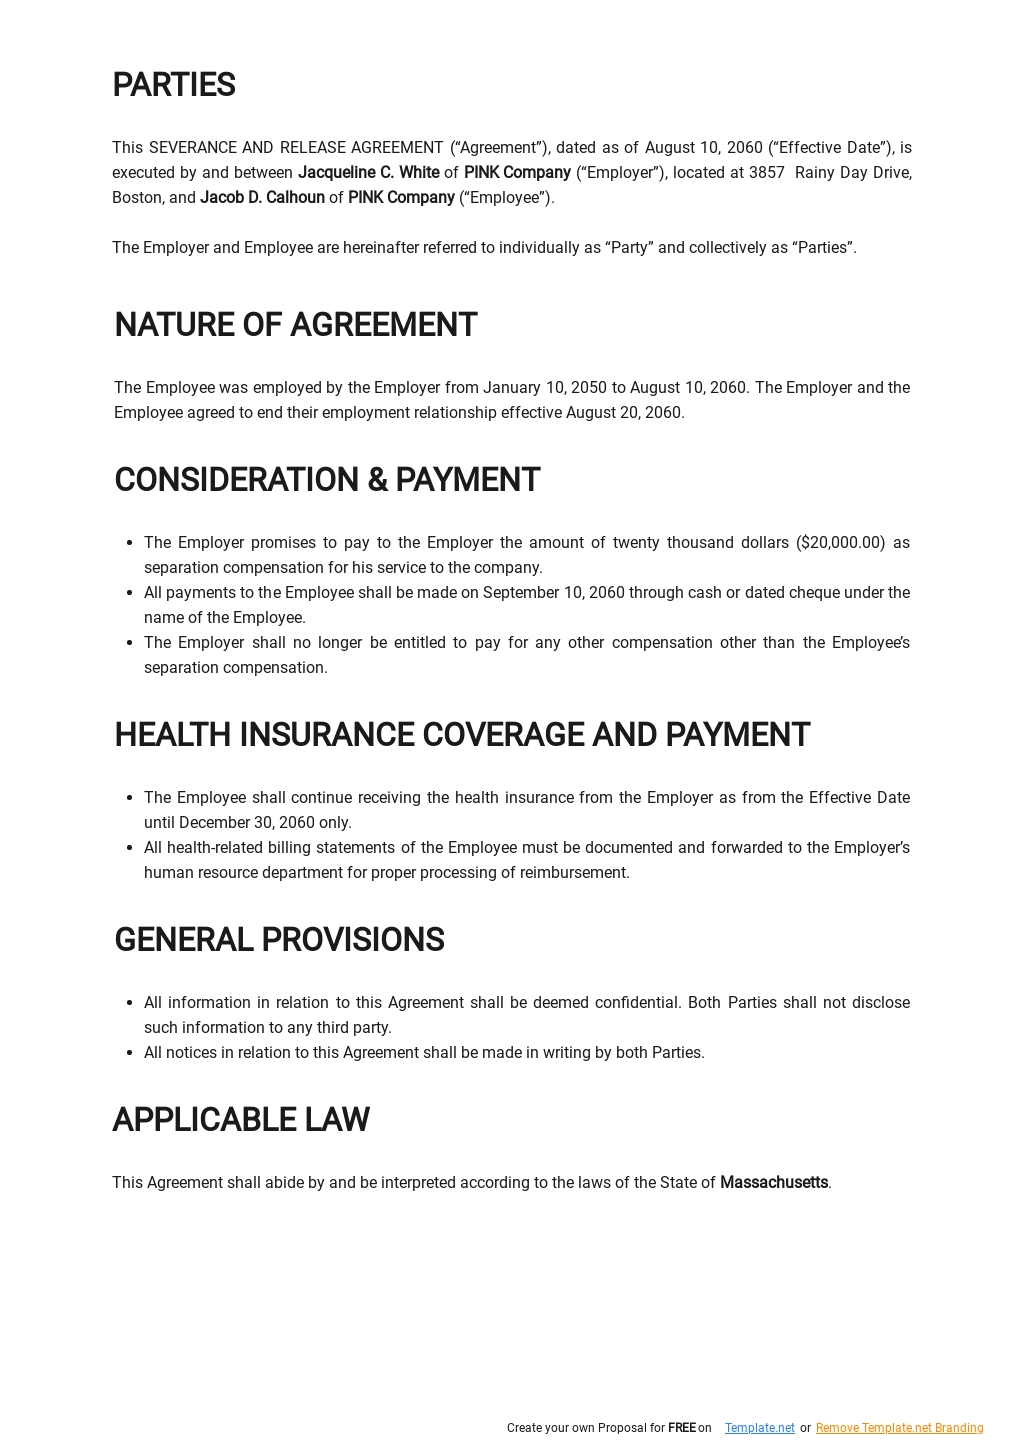 Severance and Release Agreement Template  1.jpe